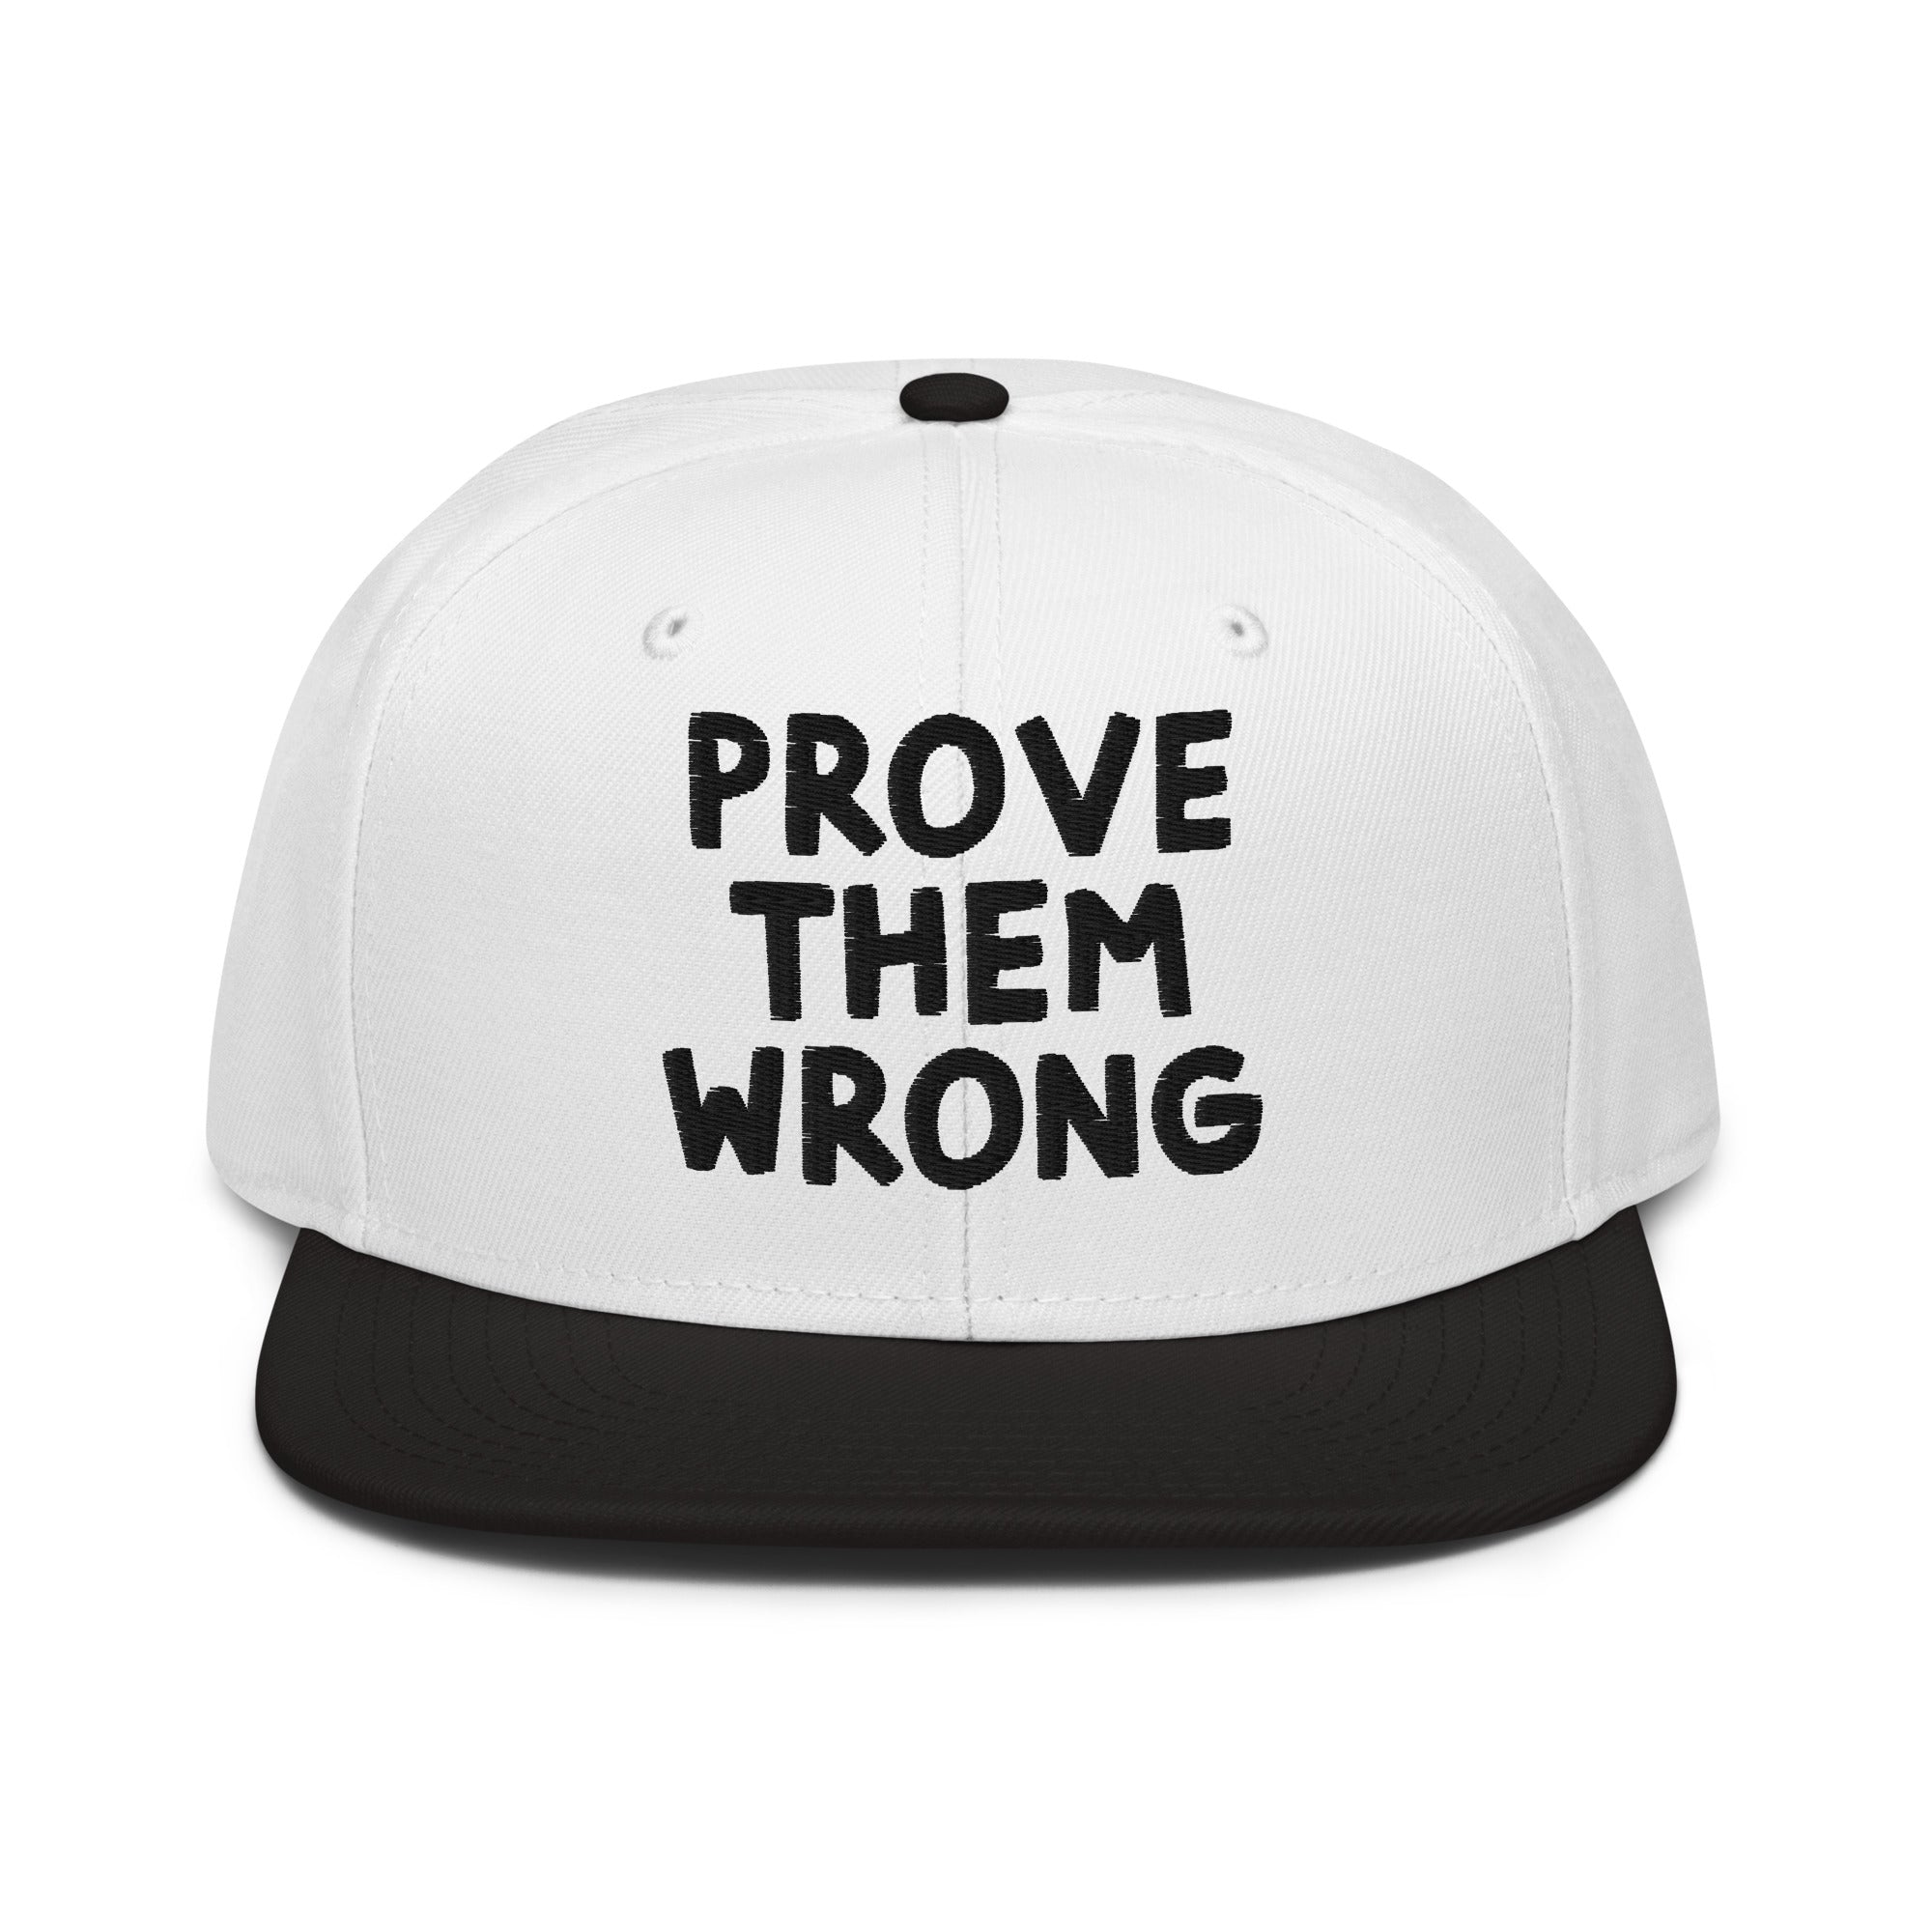 New! Prove Them Wrong Snapback Hat